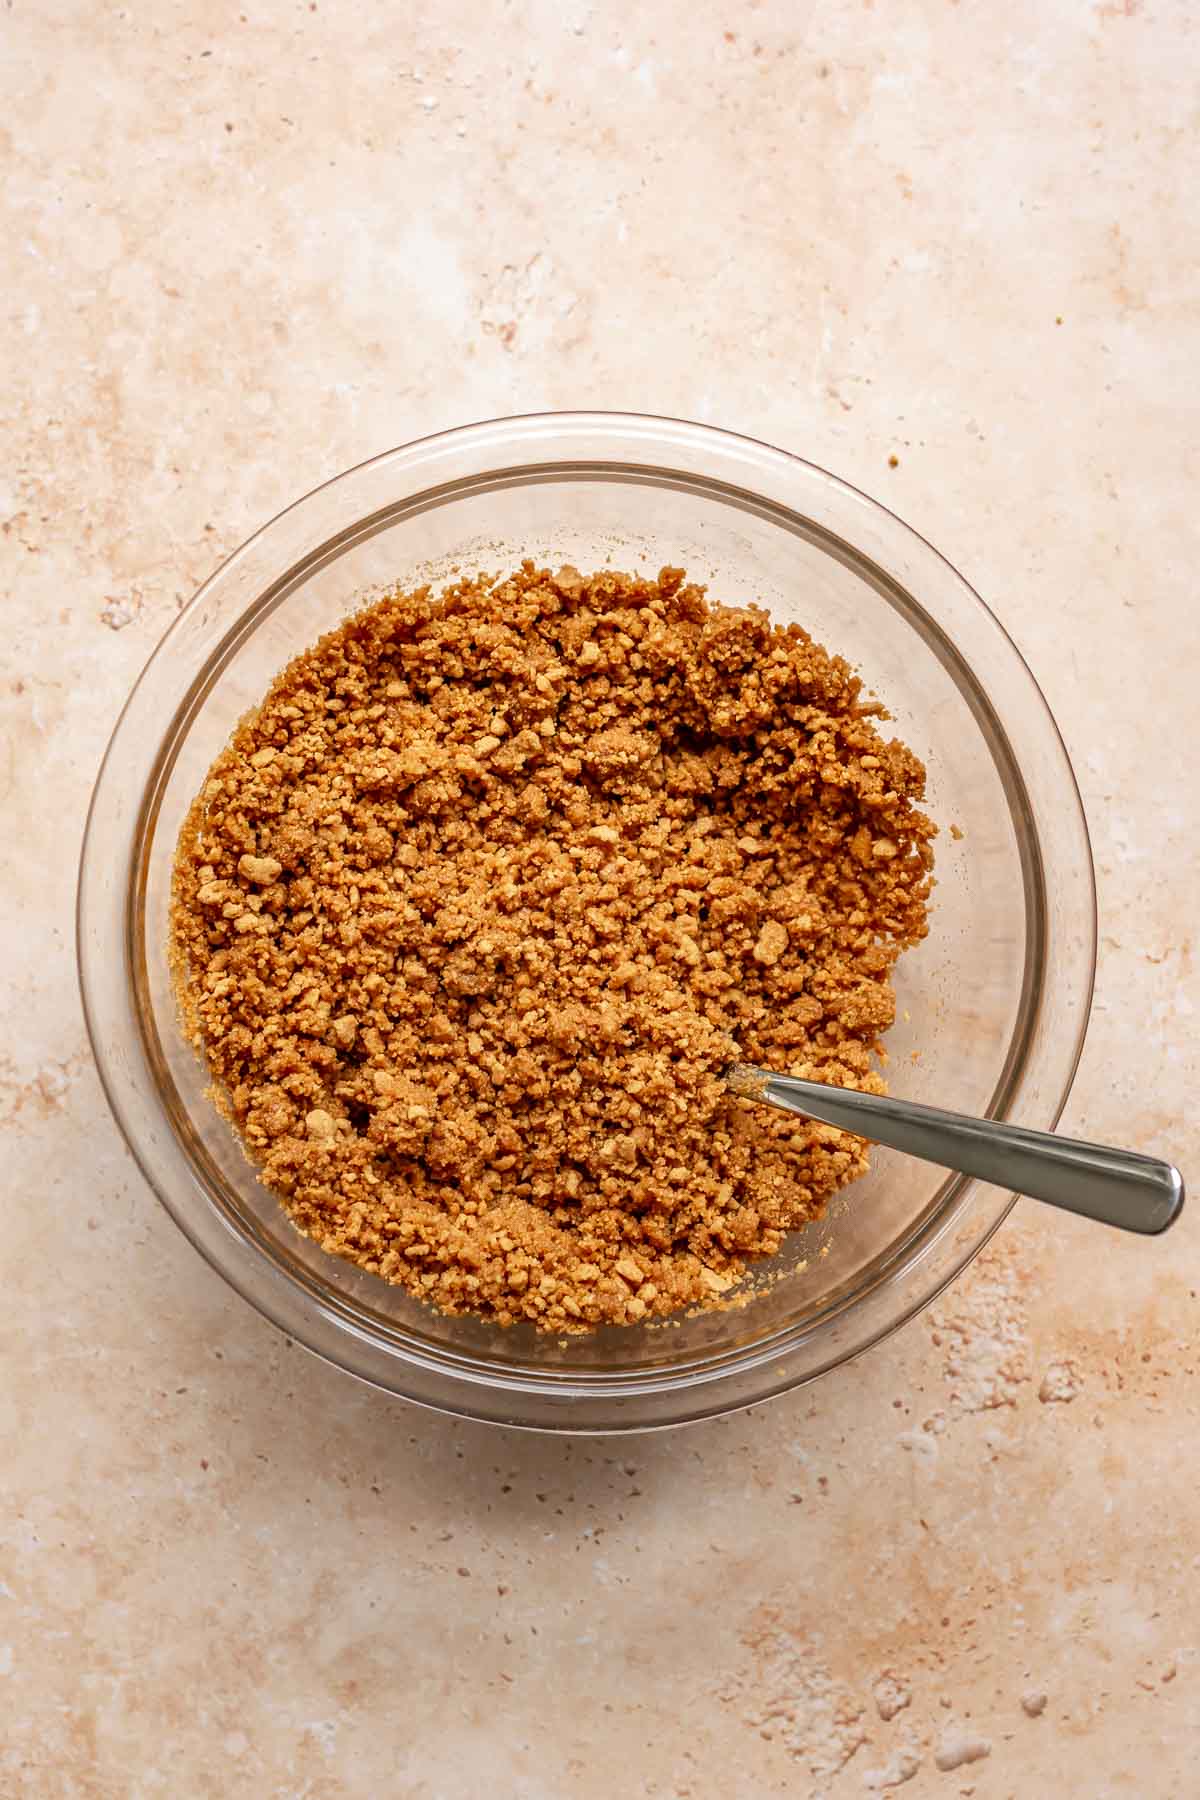 Ginger snap crumbs in a bowl with a fork.